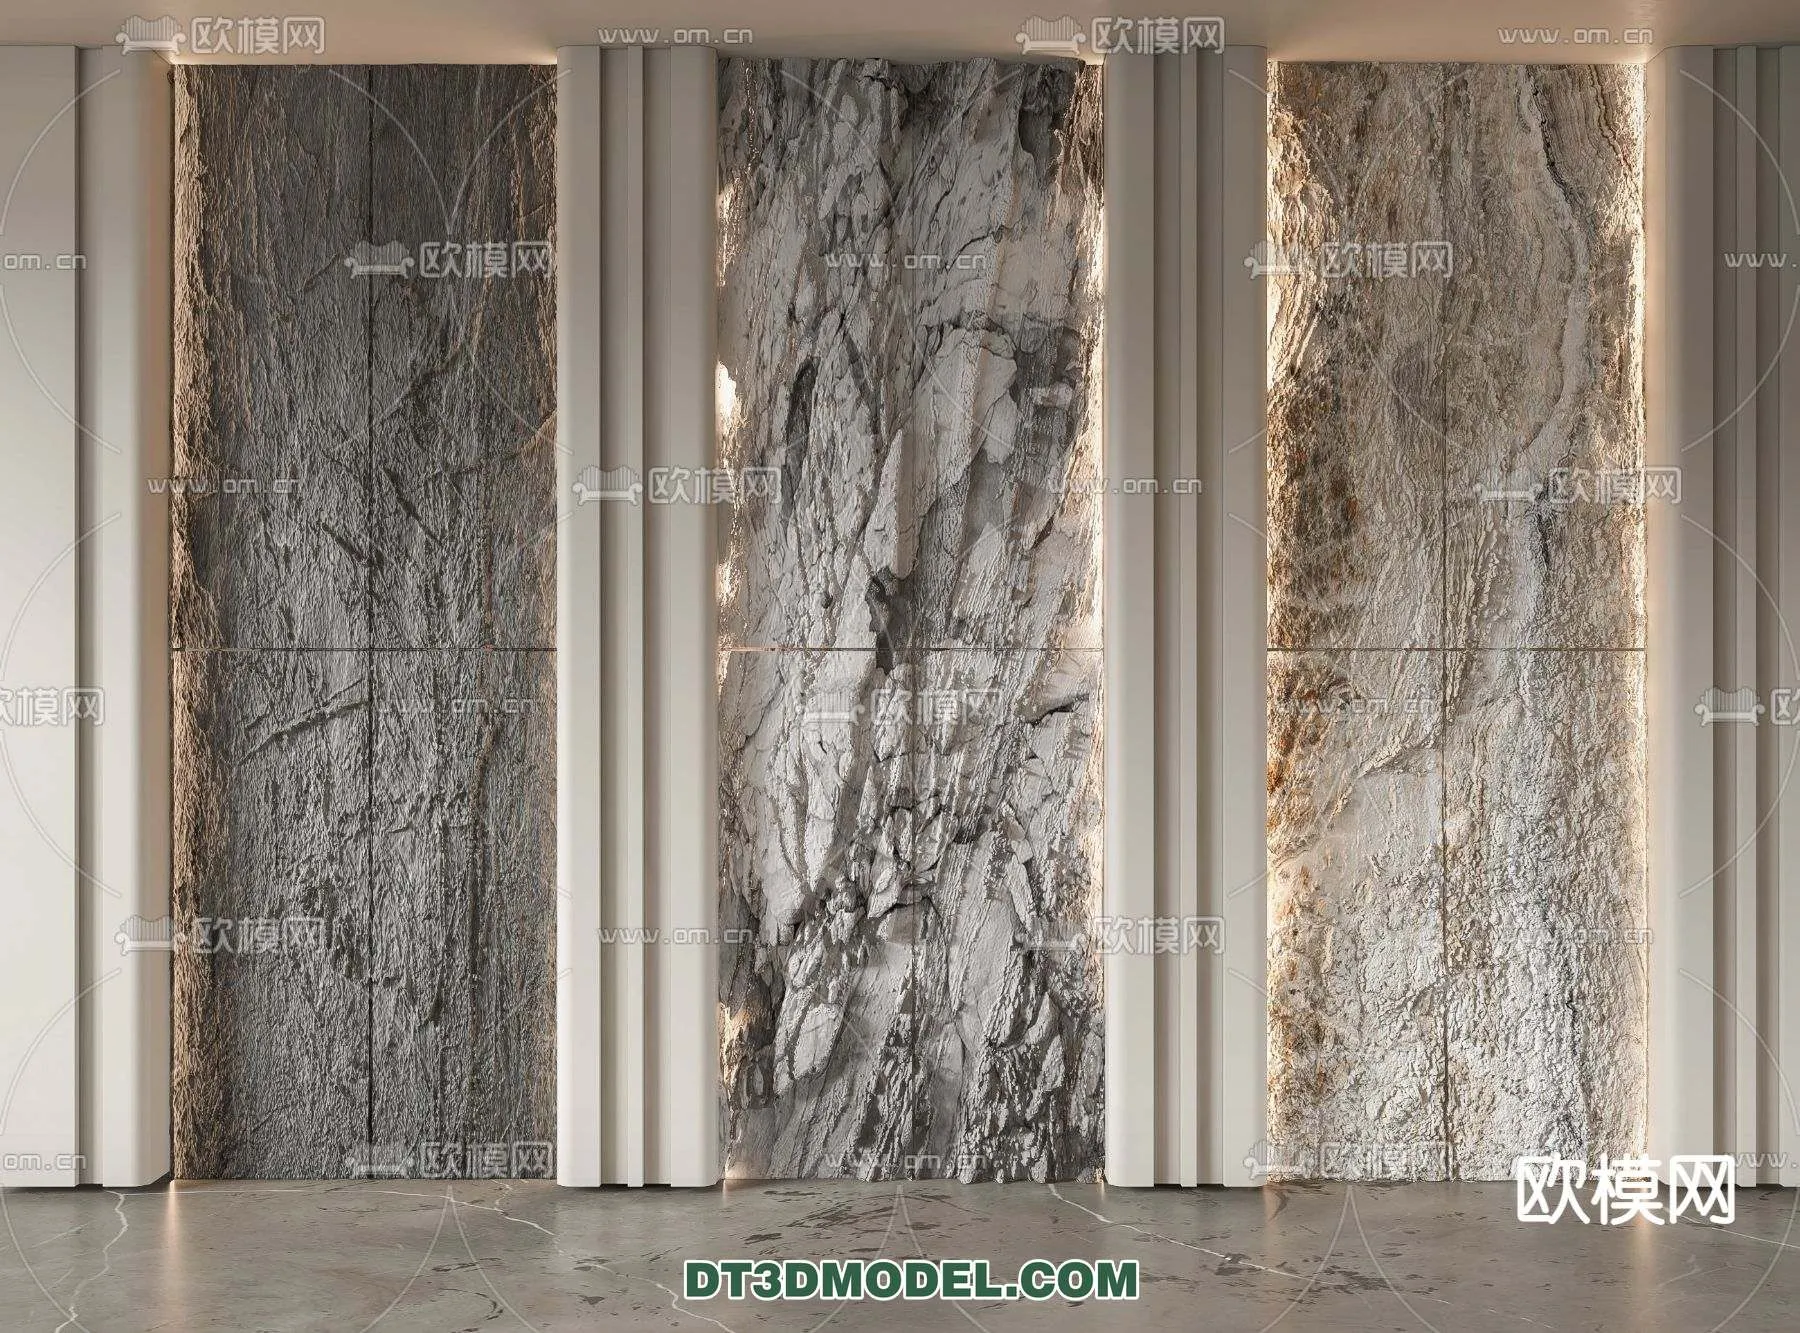 MATERIAL – TEXTURES – ROCK WALL – 0053